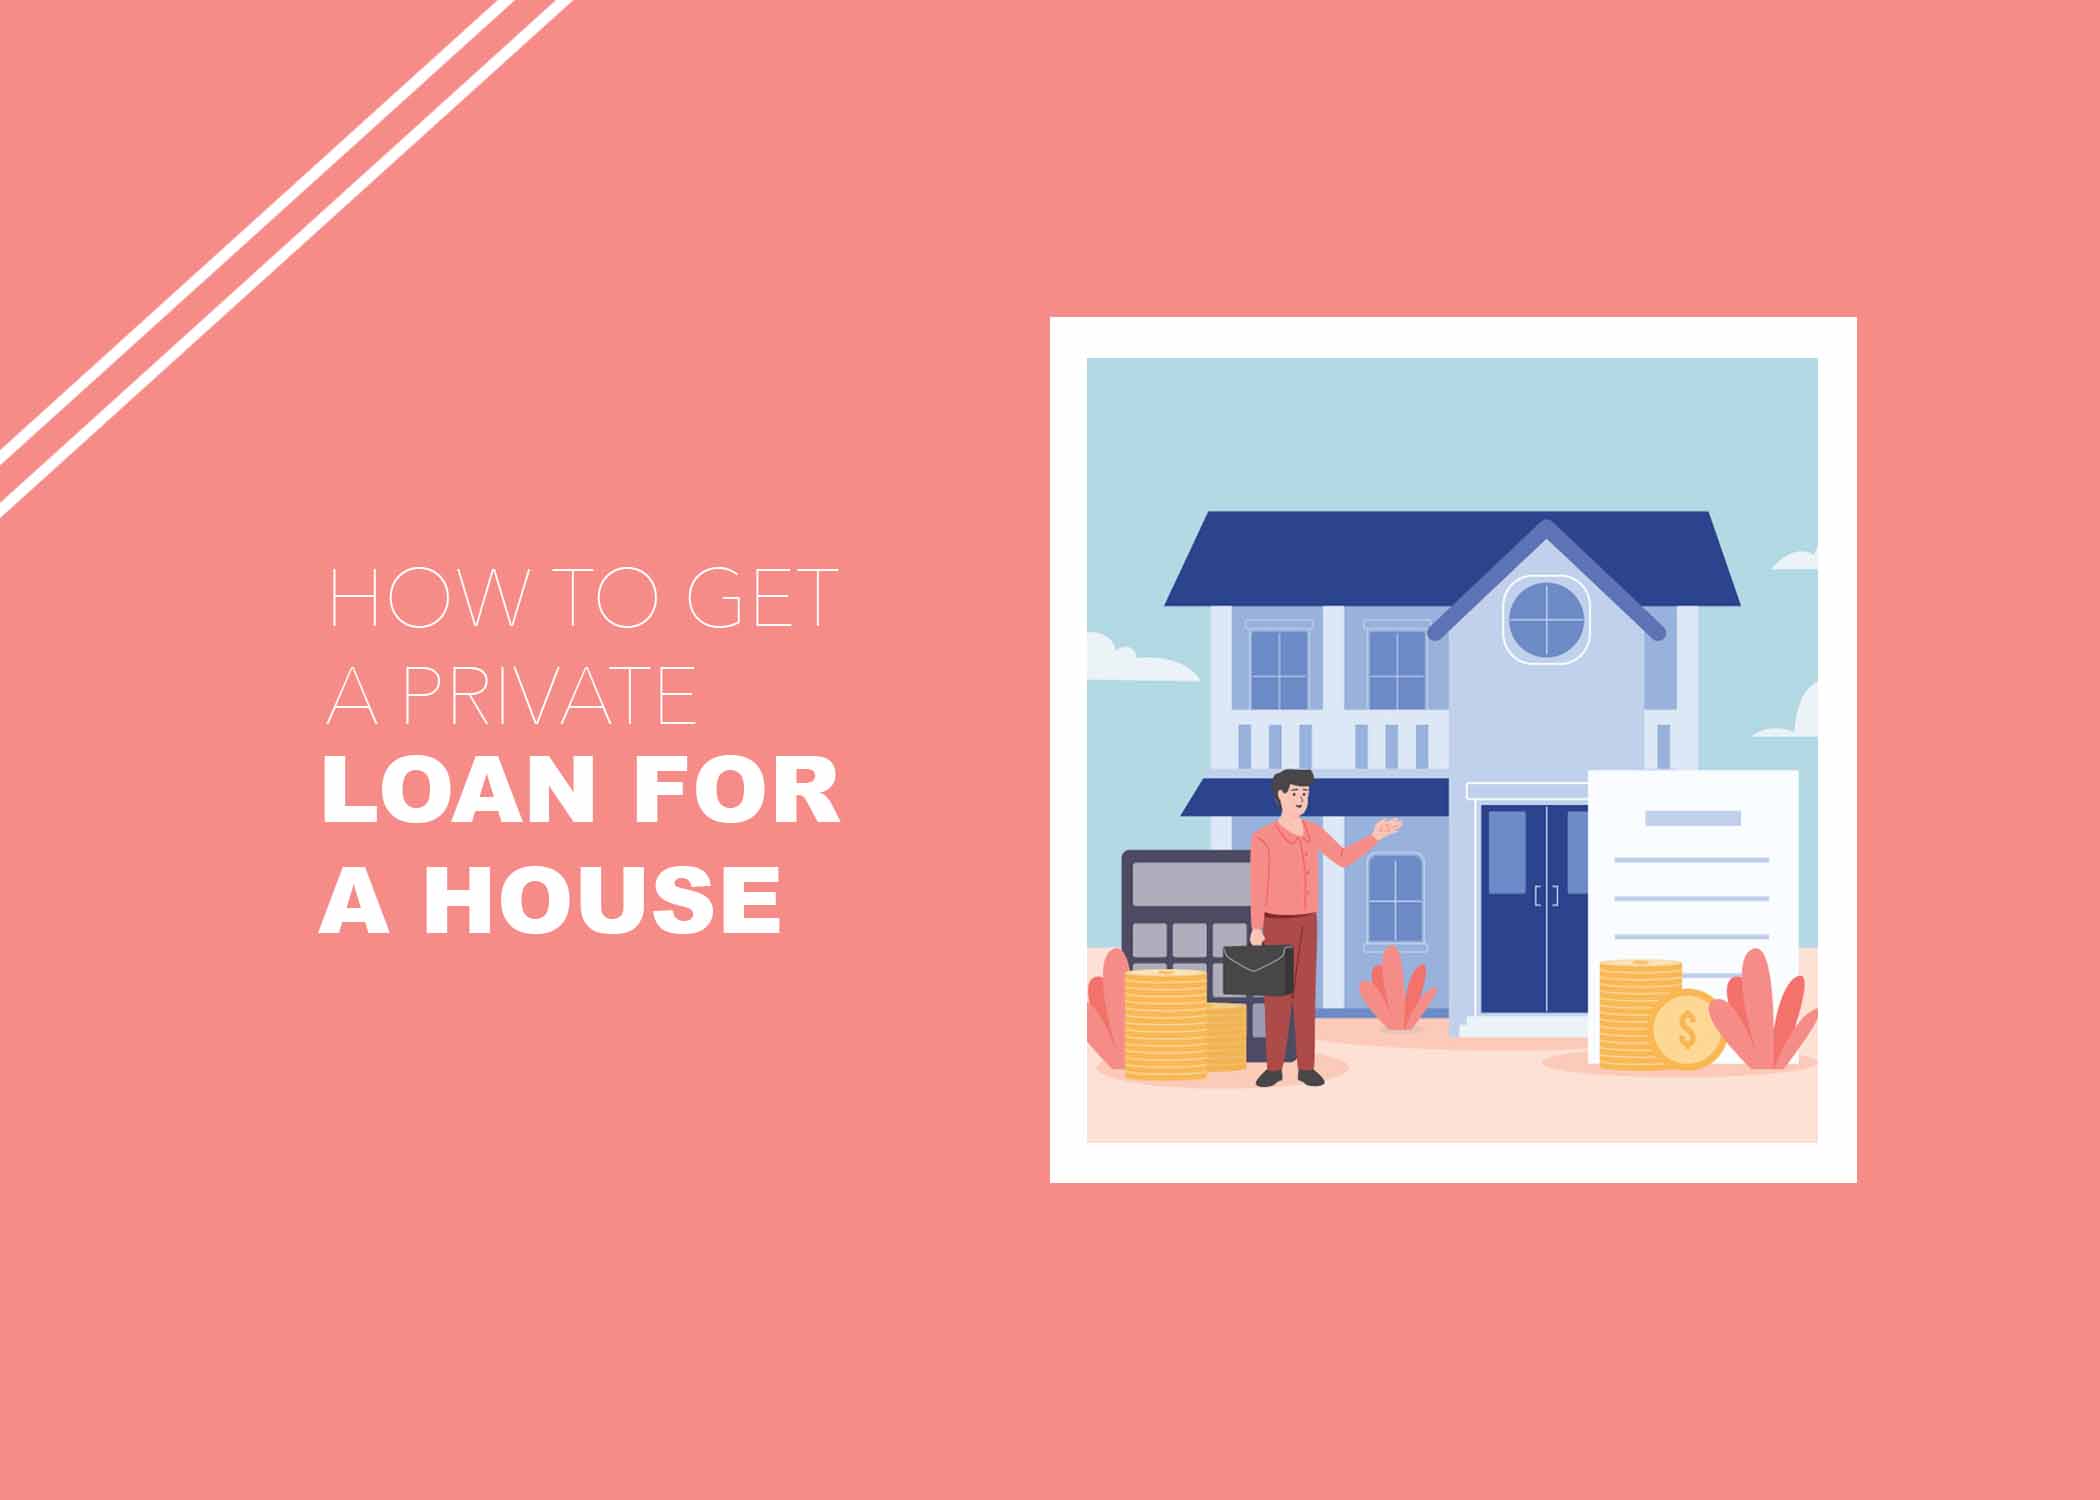 How to Get a Private Loan for a House